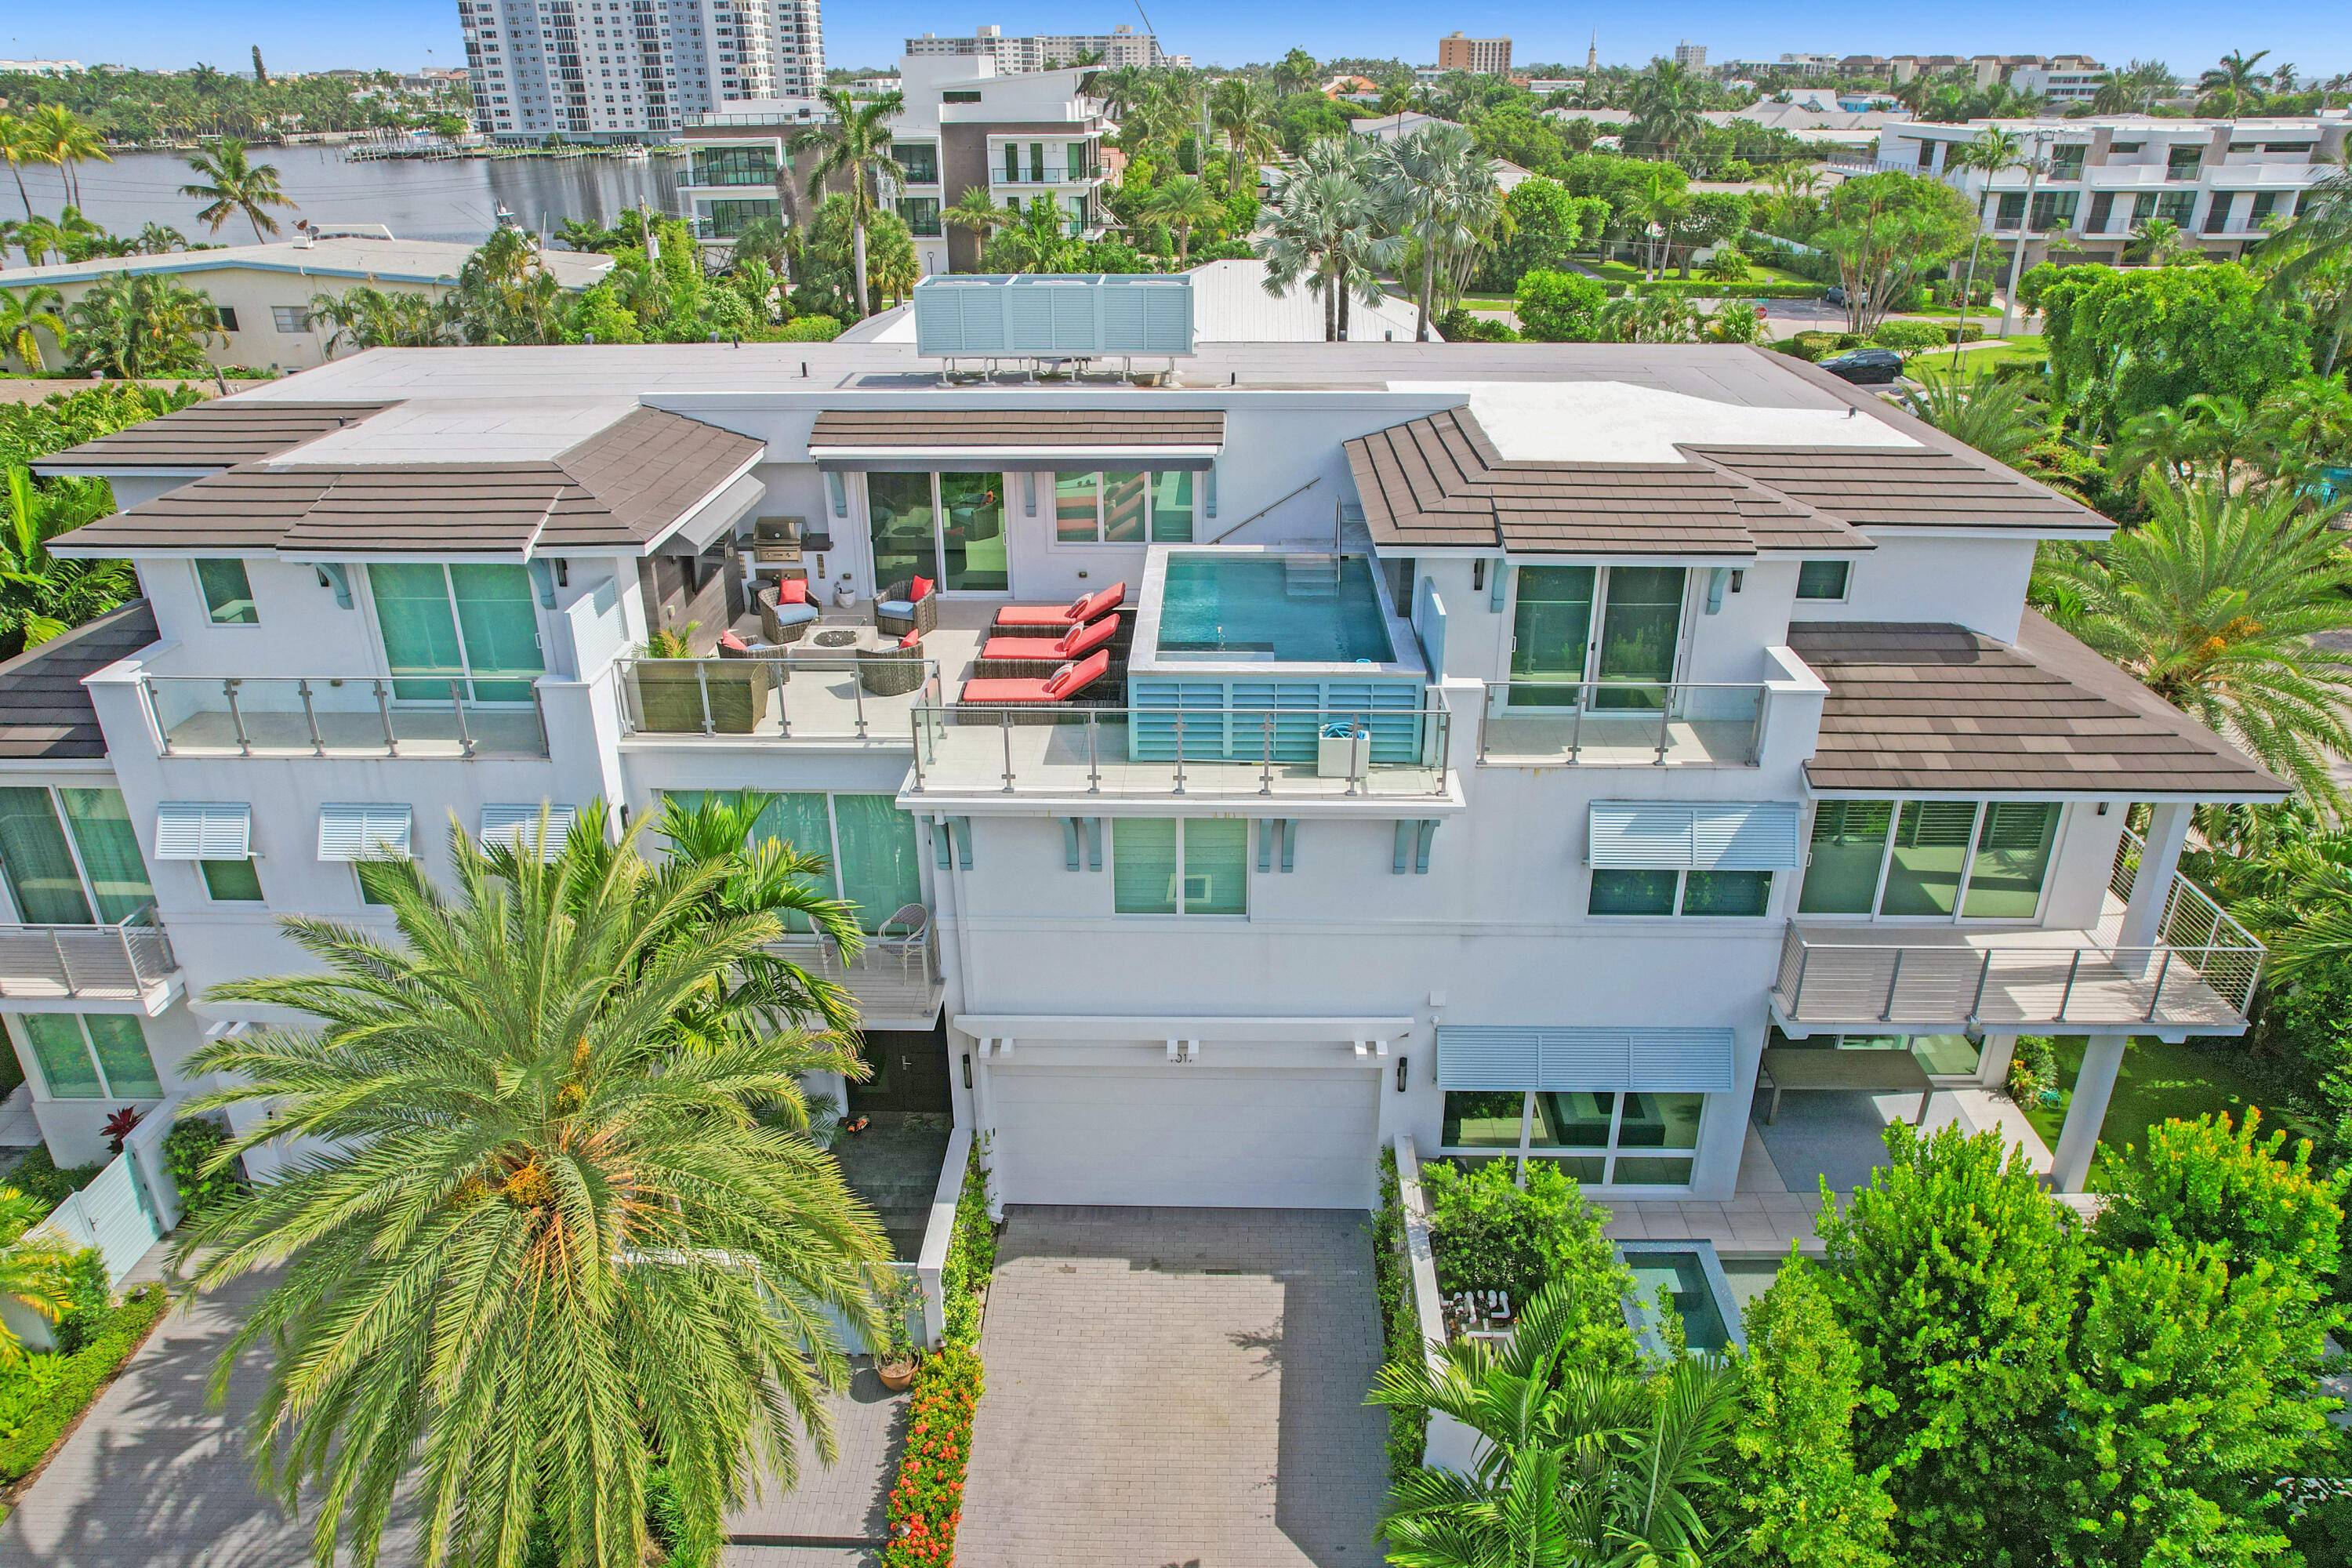 Stunning turn key, contemporary townhouse in the heart of Delray's sought after Seagate neighborhood.